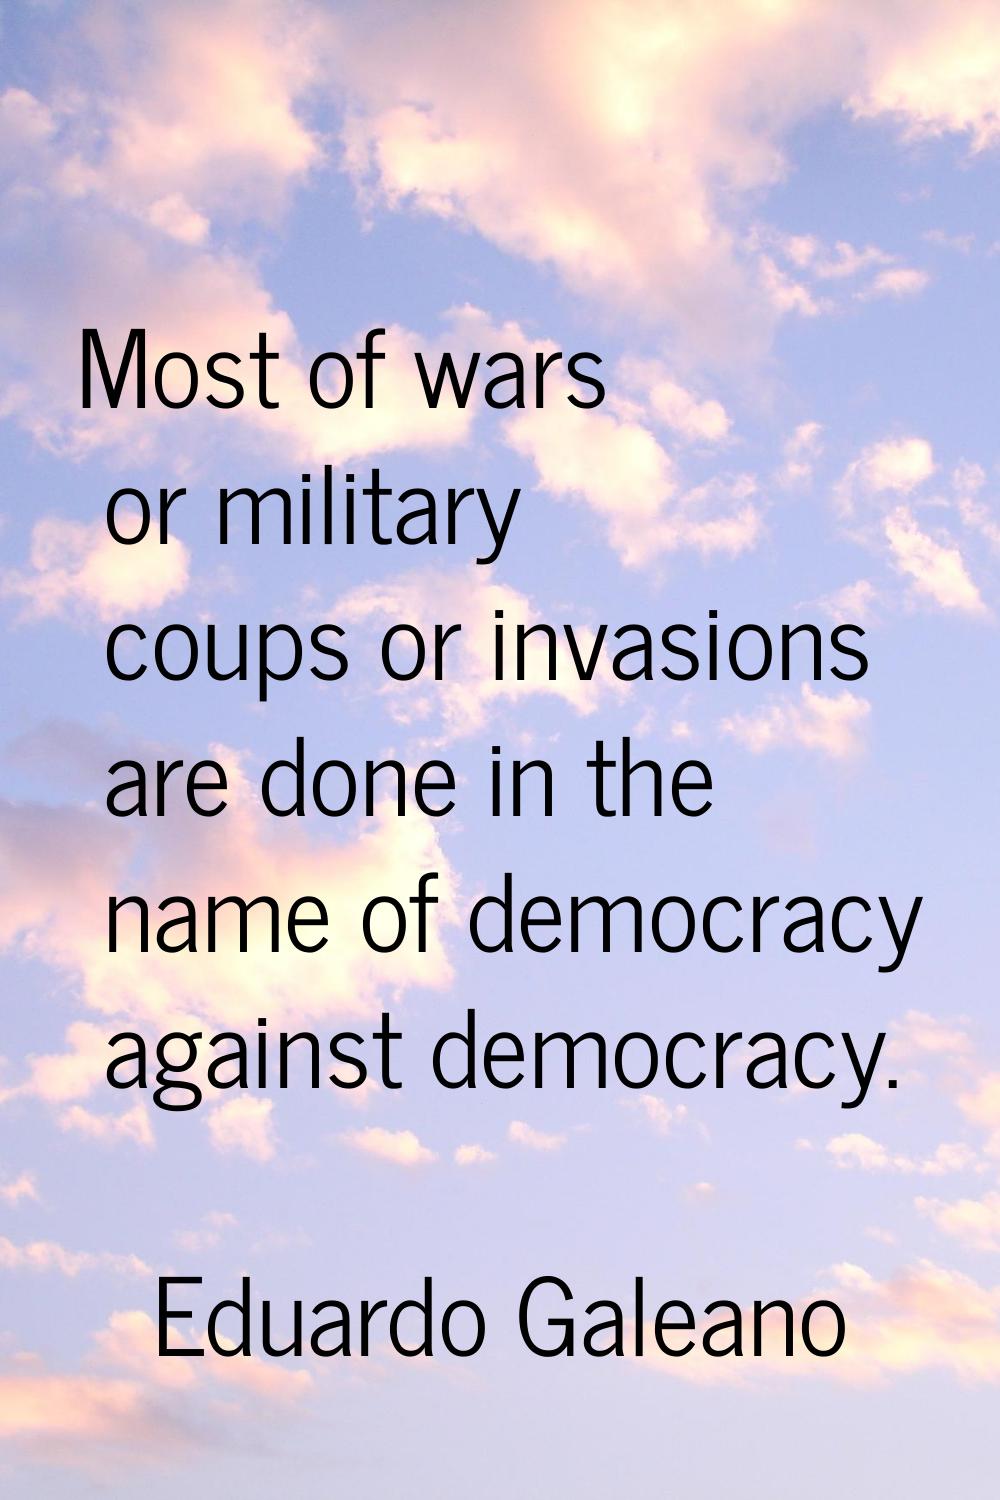 Most of wars or military coups or invasions are done in the name of democracy against democracy.